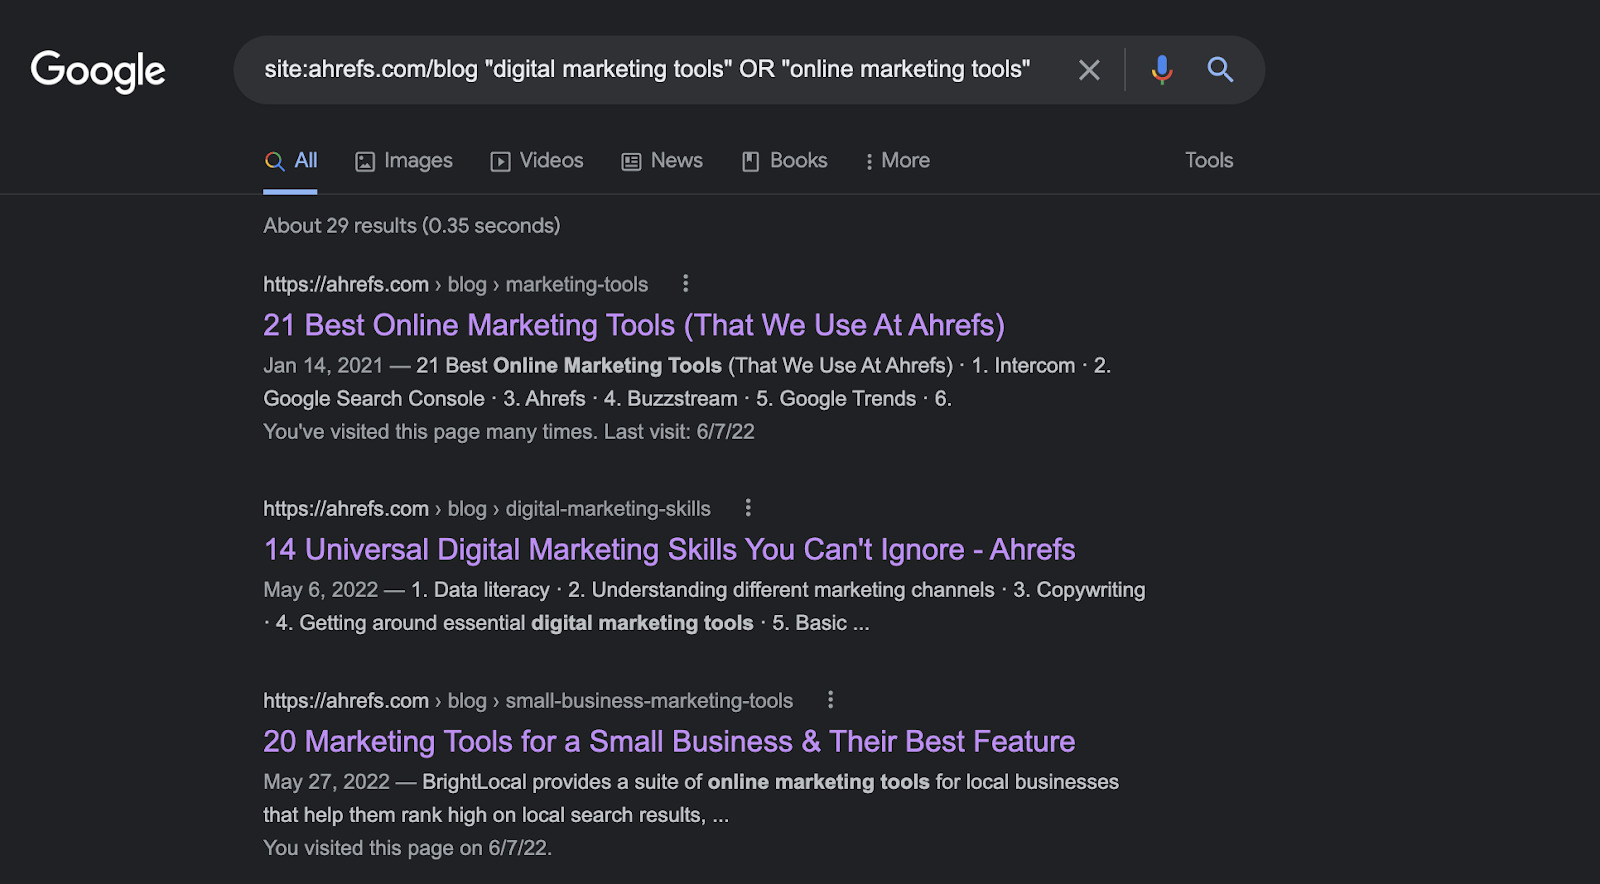 OR search operator used to find terms "digital marketing tools" and "online marketing tools" on Ahrefs' blog